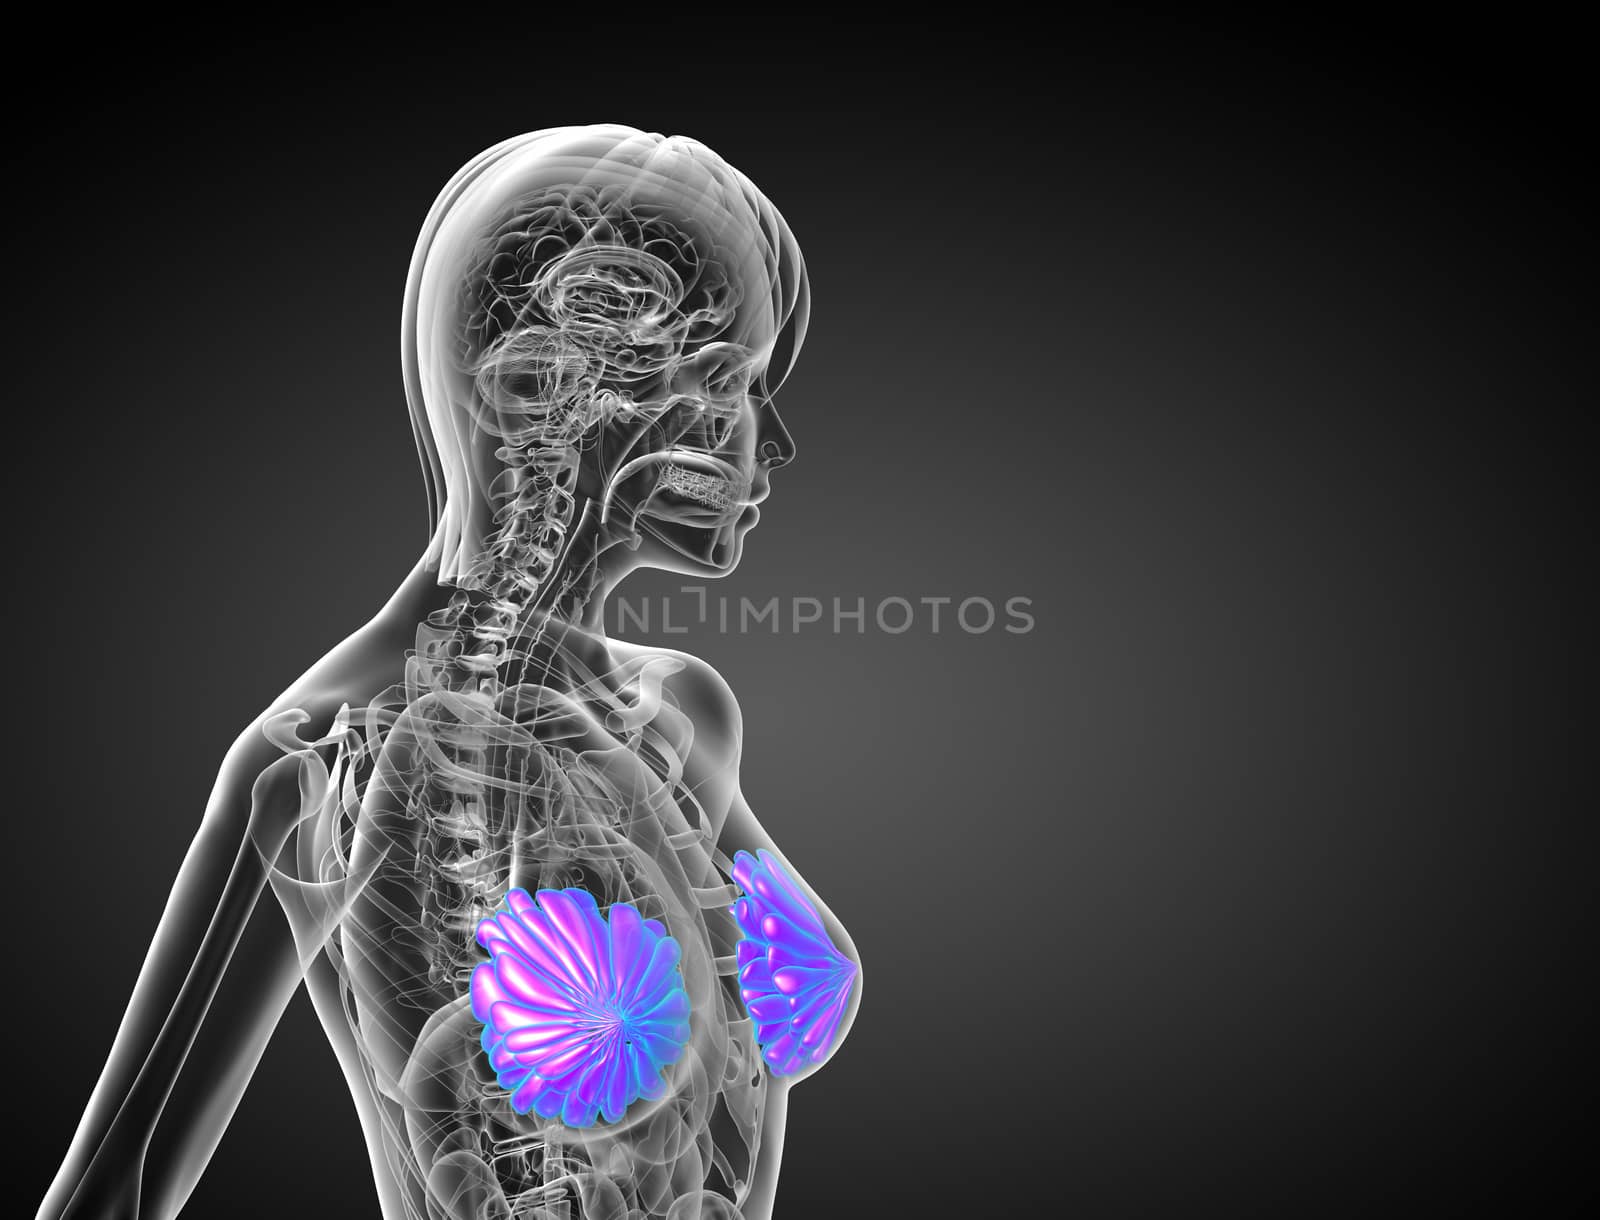 3d render medical illustration of the human breast - side view